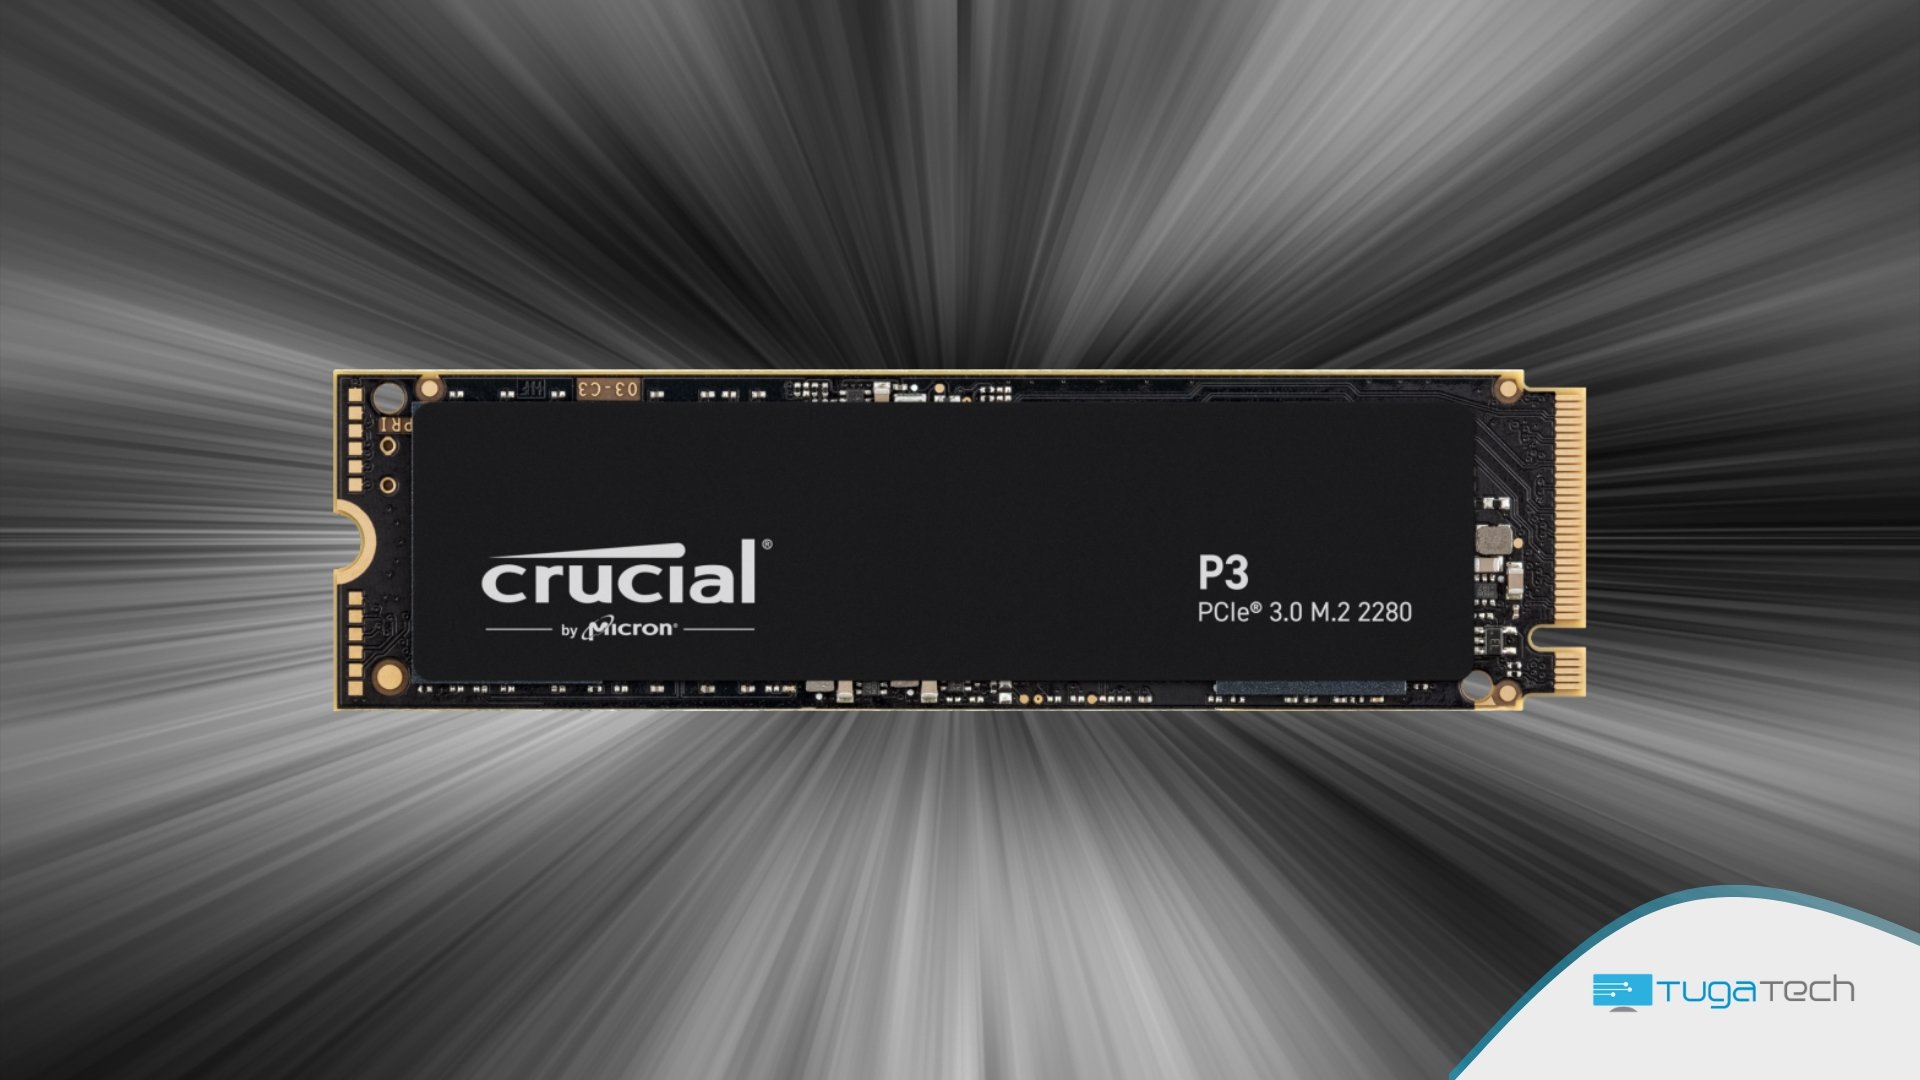 Crucial P3 NVMe SSD